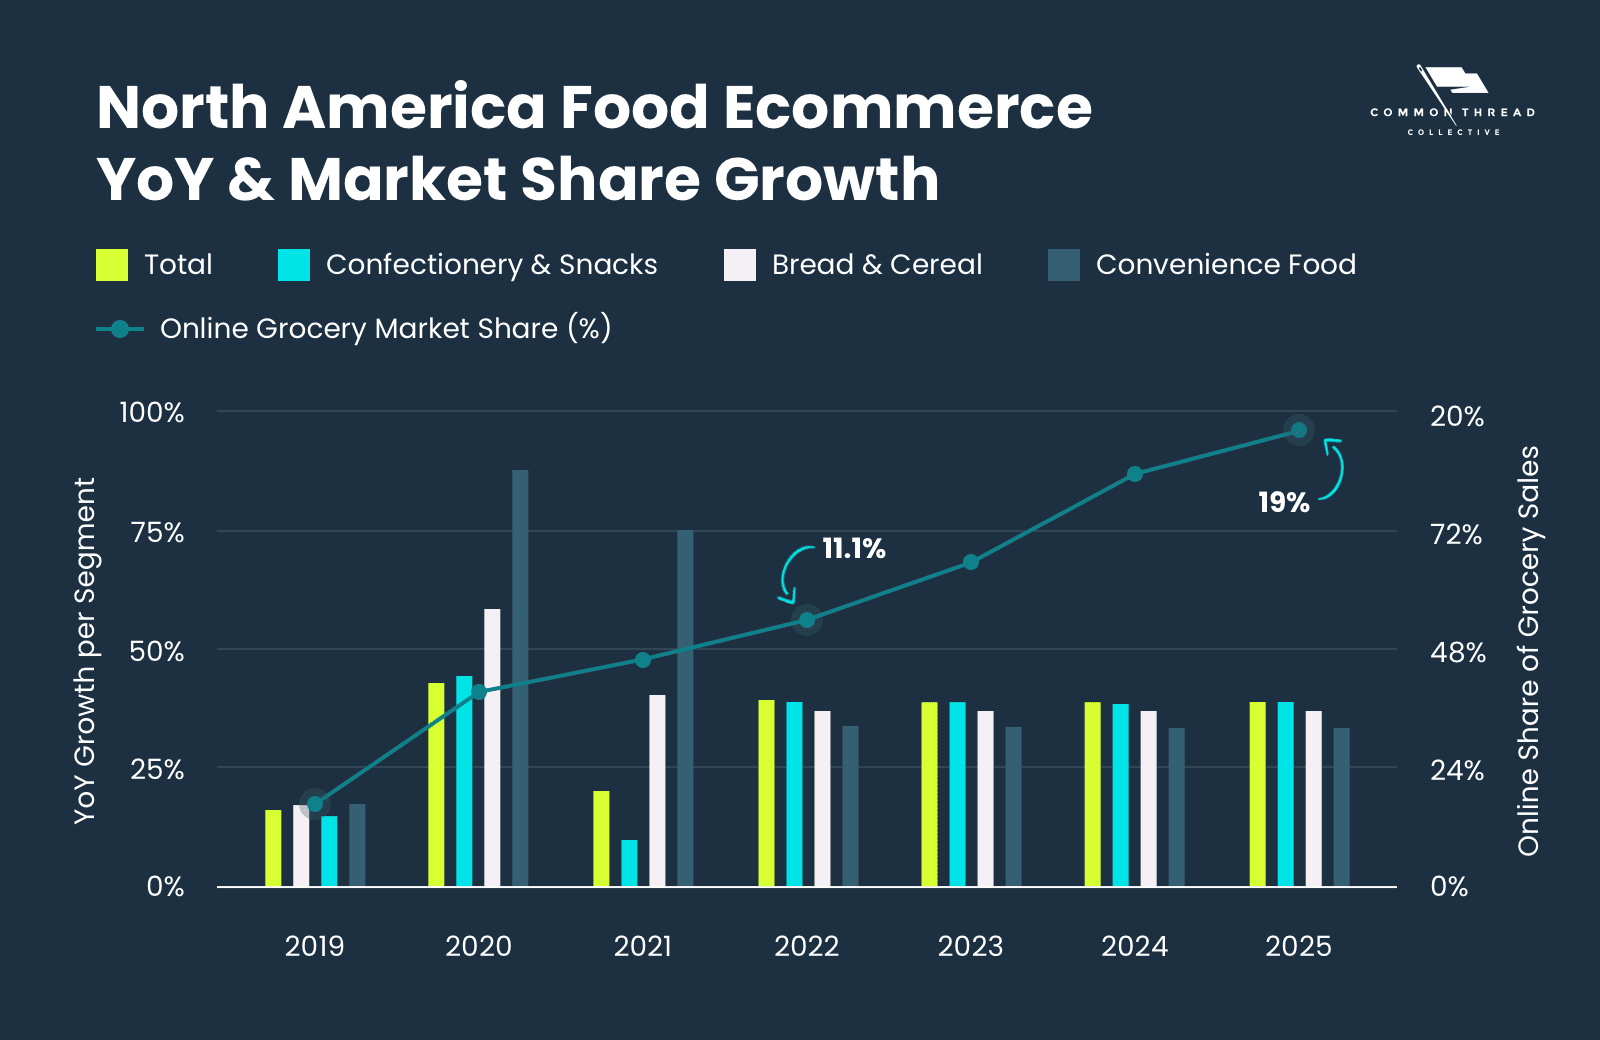 https://cdn.shopify.com/s/files/1/1024/1659/files/North_America_Food_Beverage_Ecom_YoY_Market_Share_Growth.png?v=1650657838